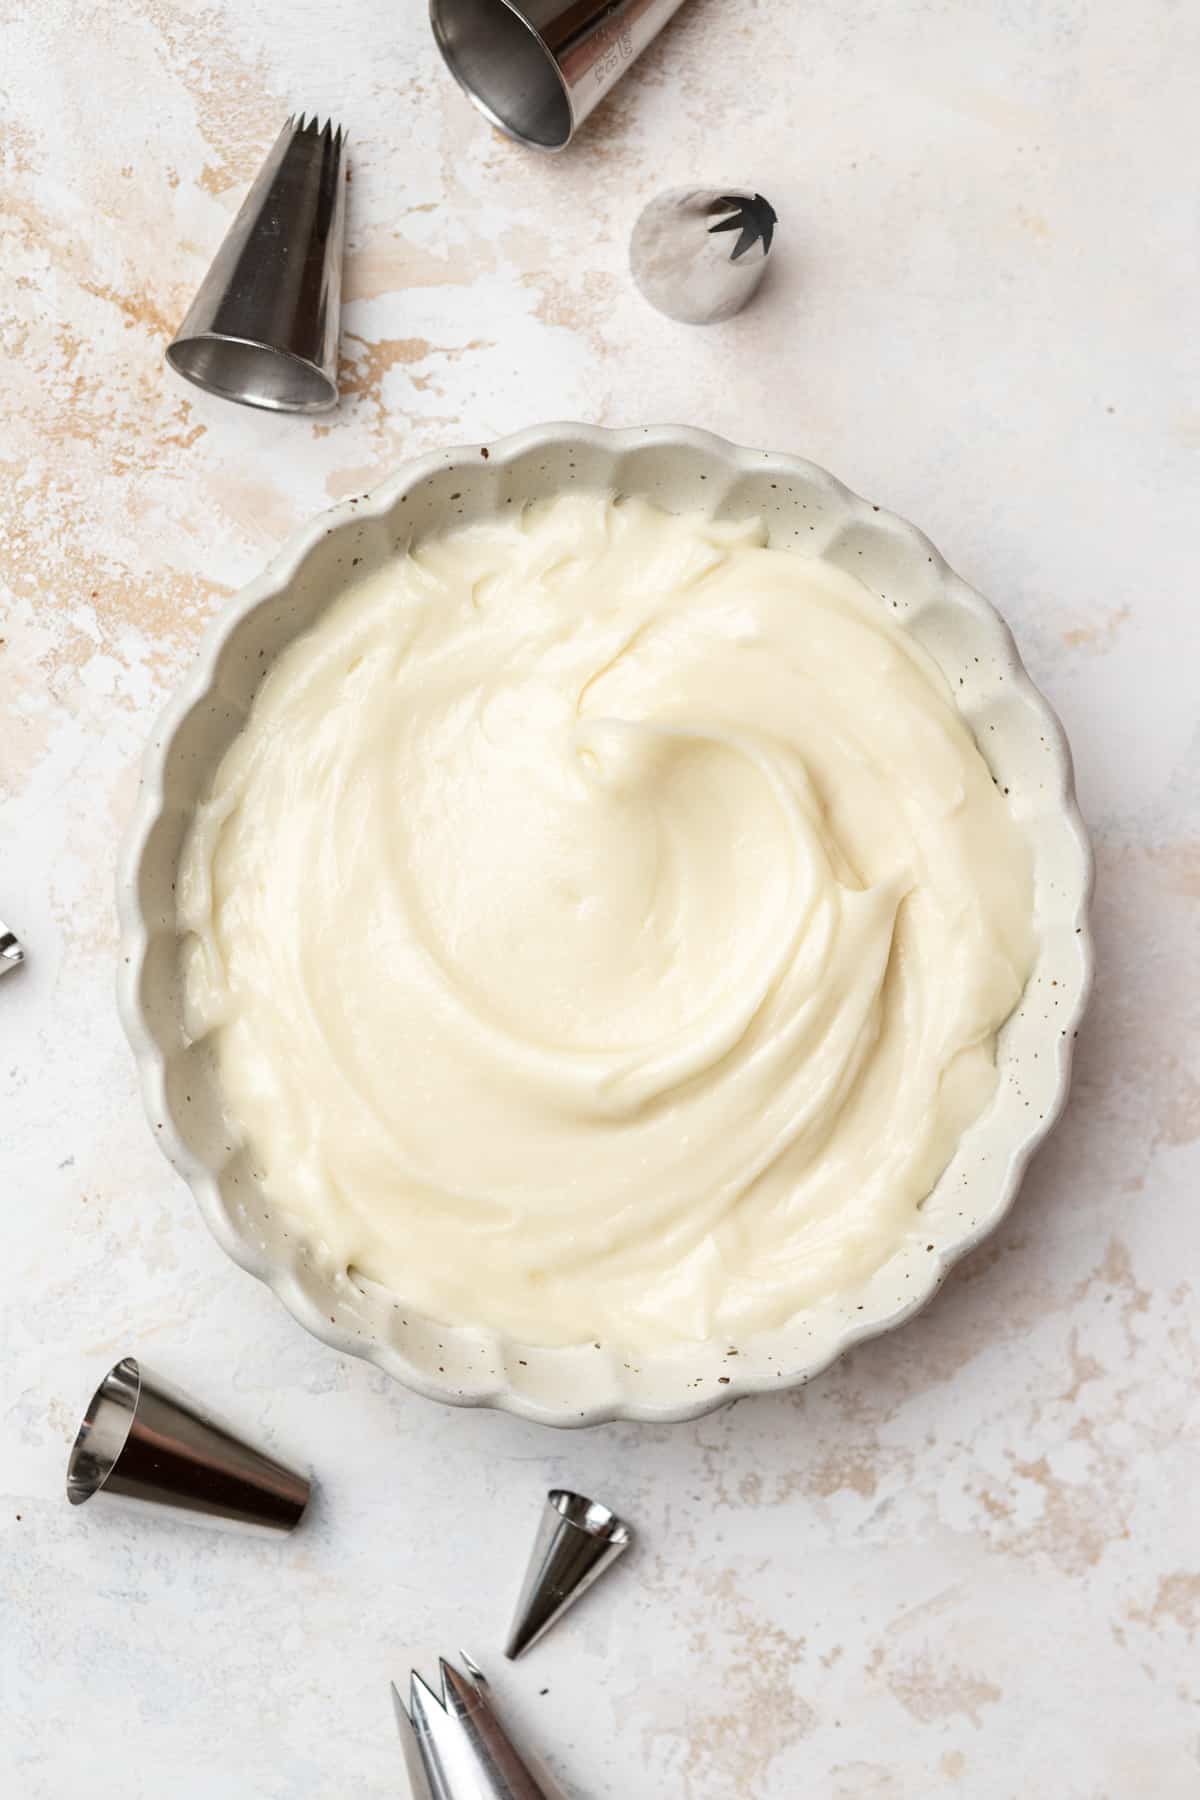 Cream cheese frosting in a bowl with piping tips around it.